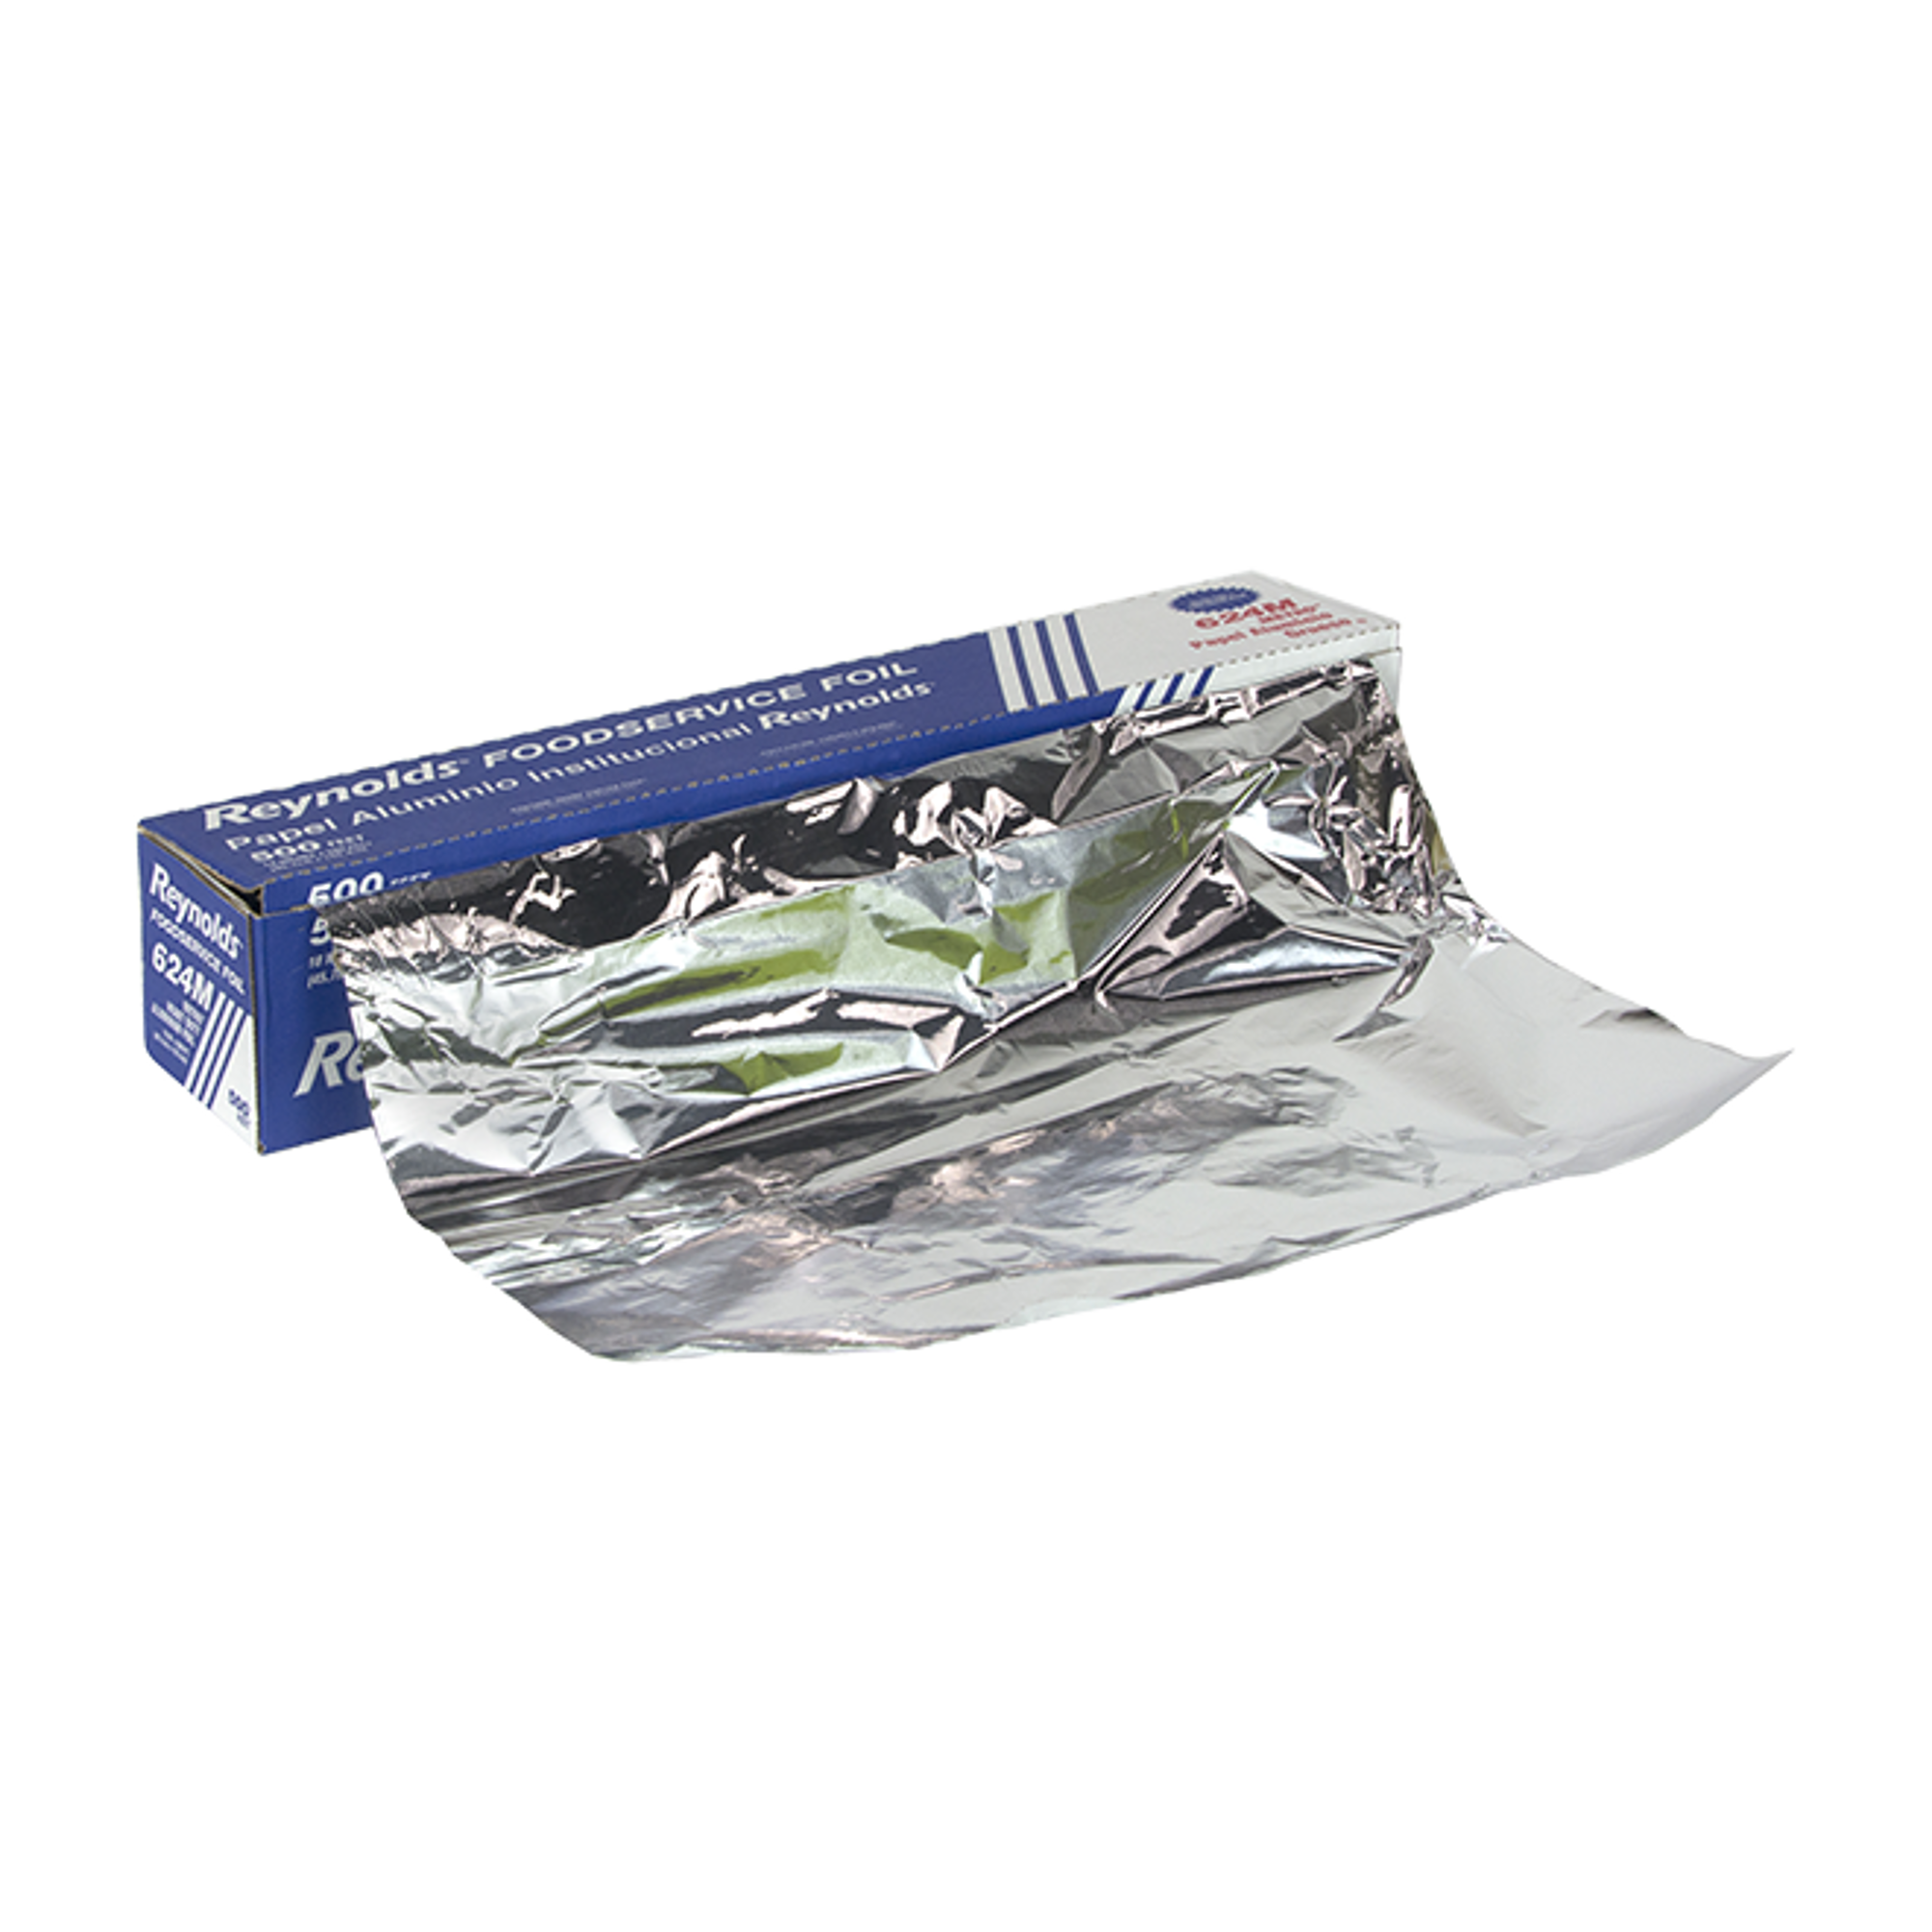 Katbite Aluminum Foil Heavy Duty 18 Inch Wide, 25 Micron Thick Strong Heavy  Duty Foil Aluminum Roll Wrap for Commercial Catering, Grilling, Roasting